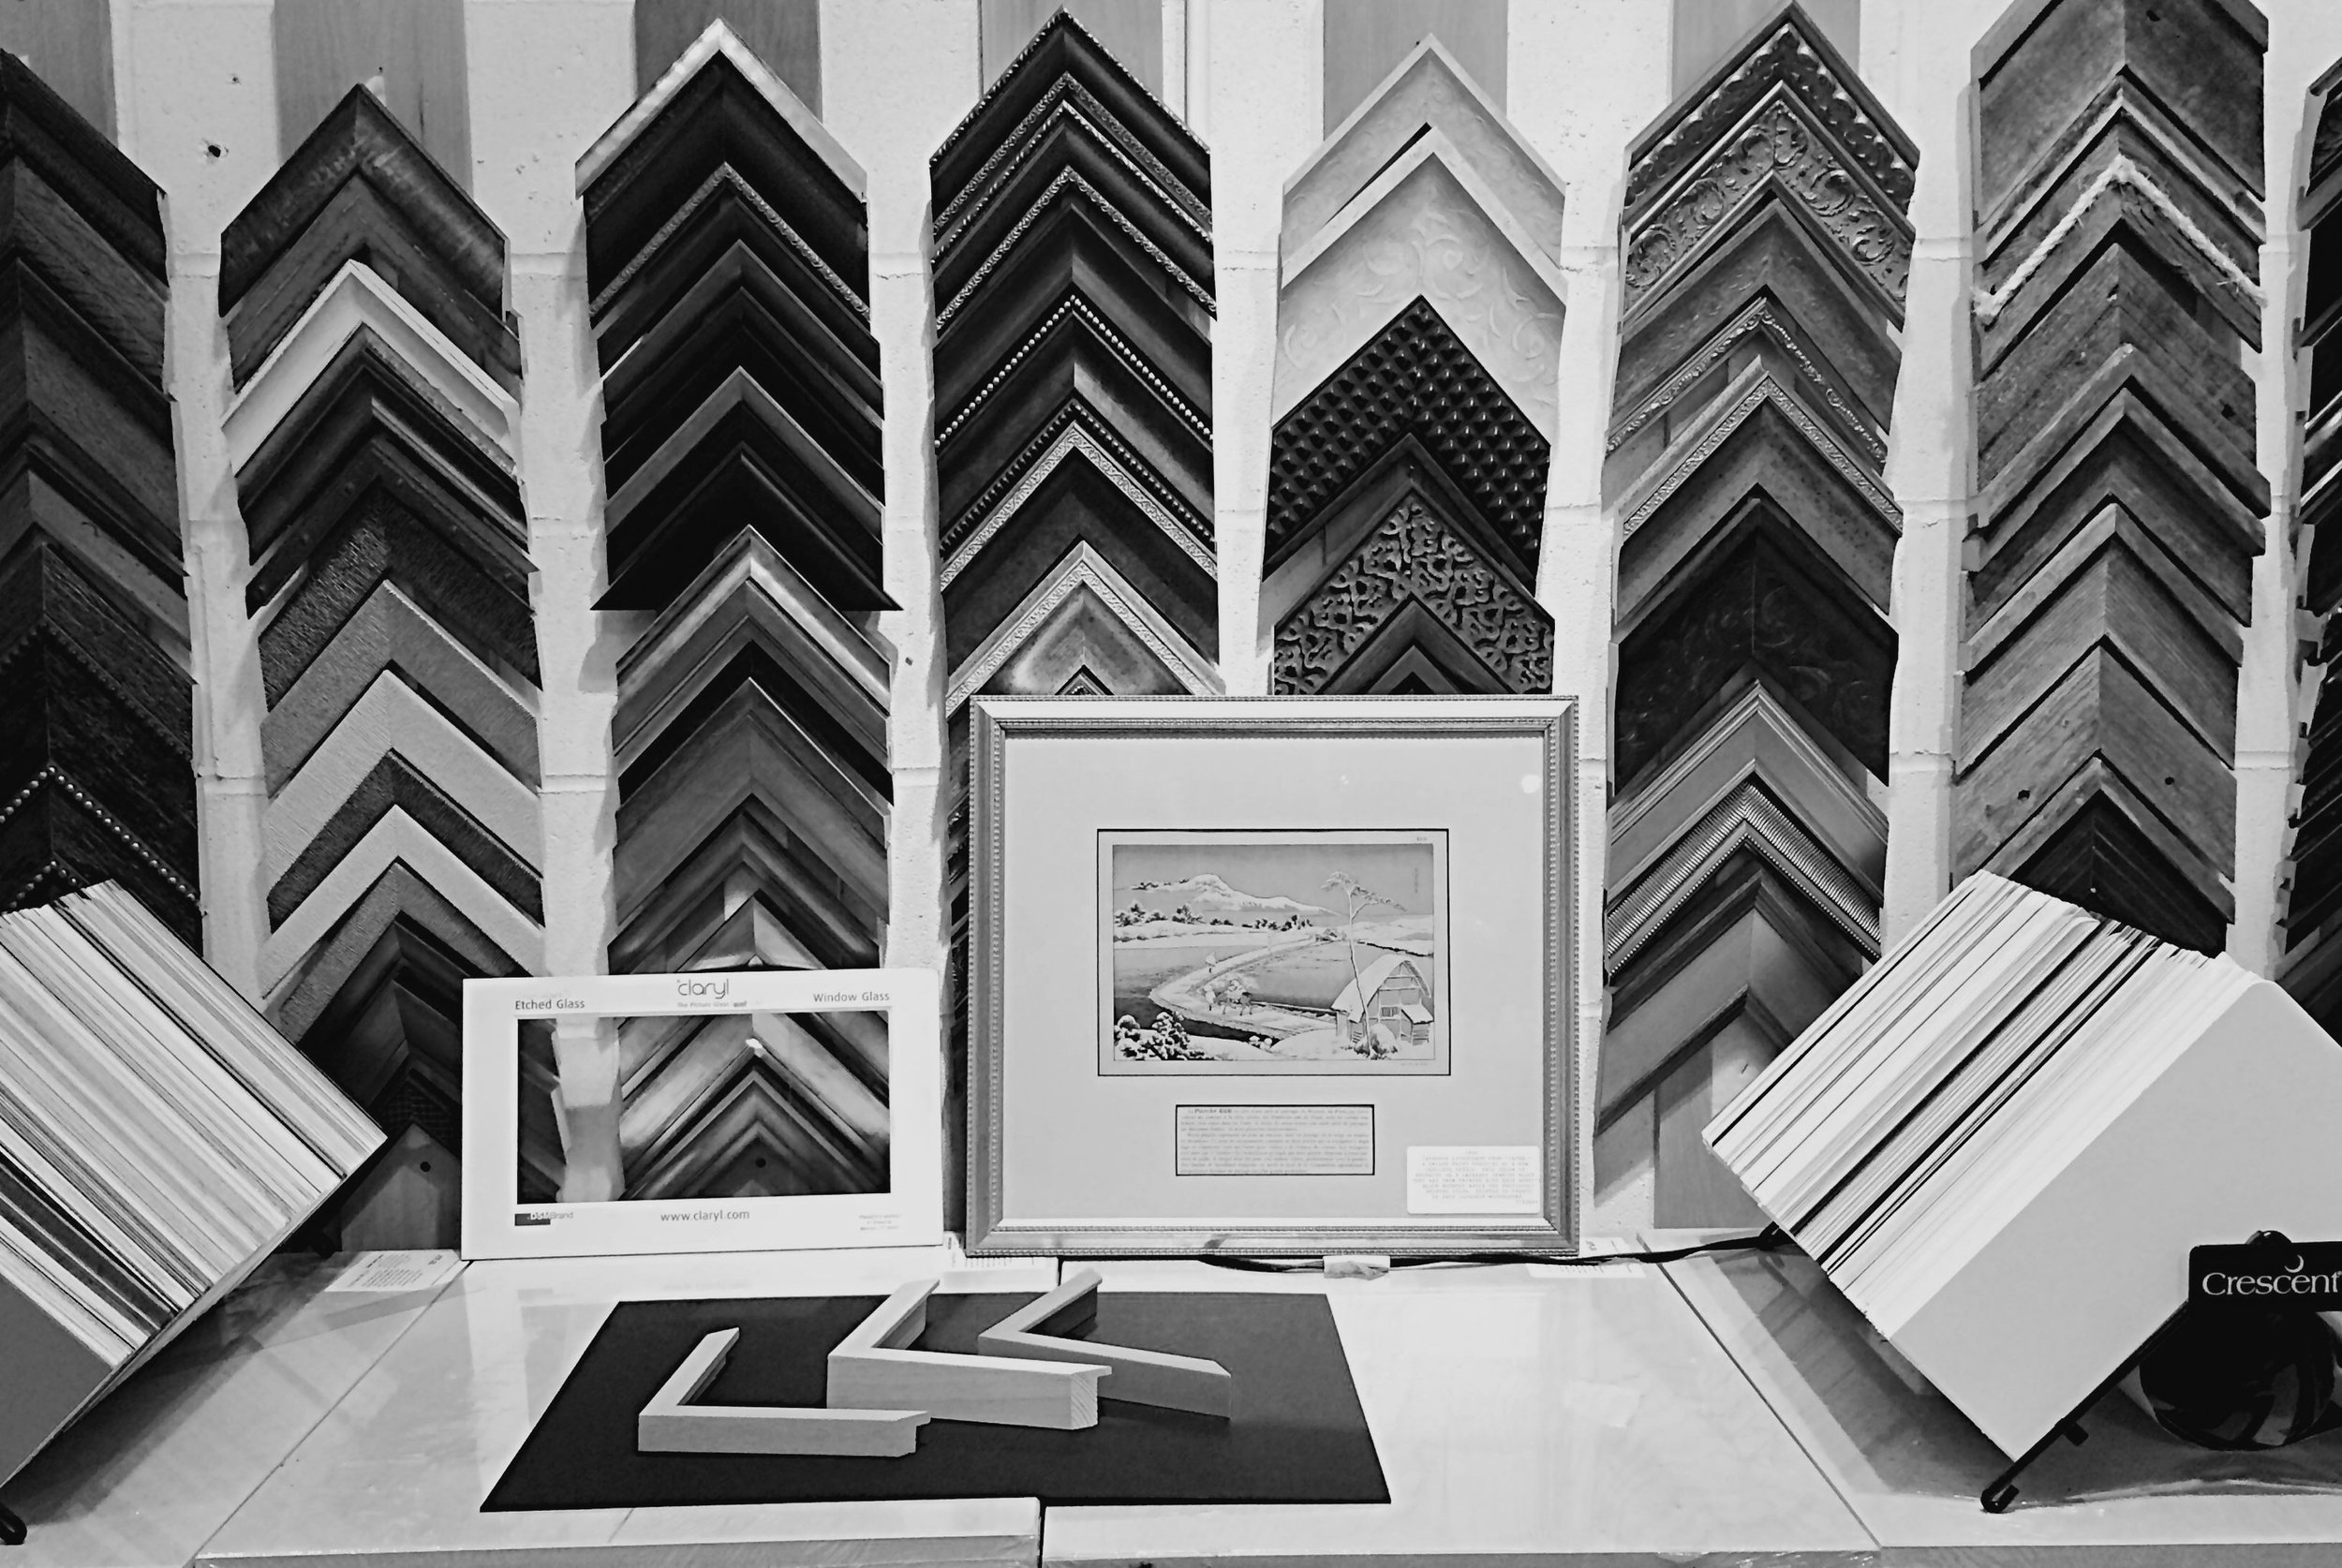 picture framing supplies